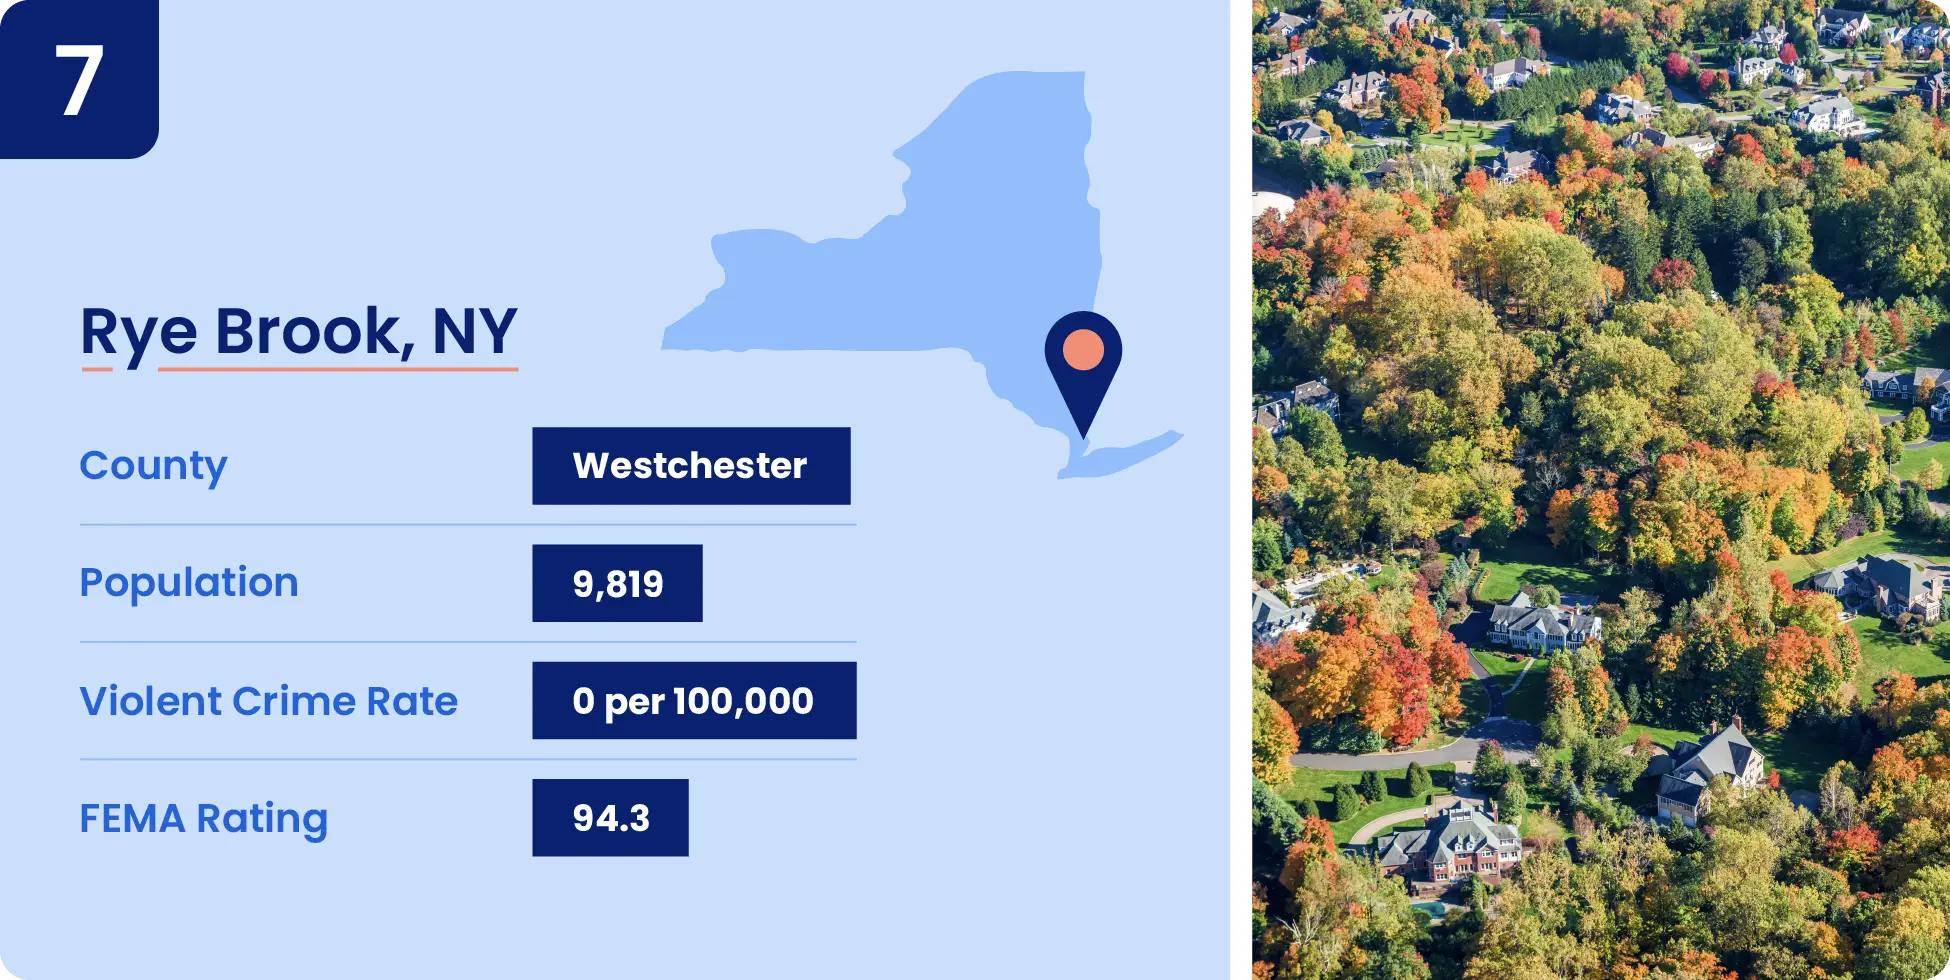 Image shows key data about one of the safest cities in New York, Rye Brook.